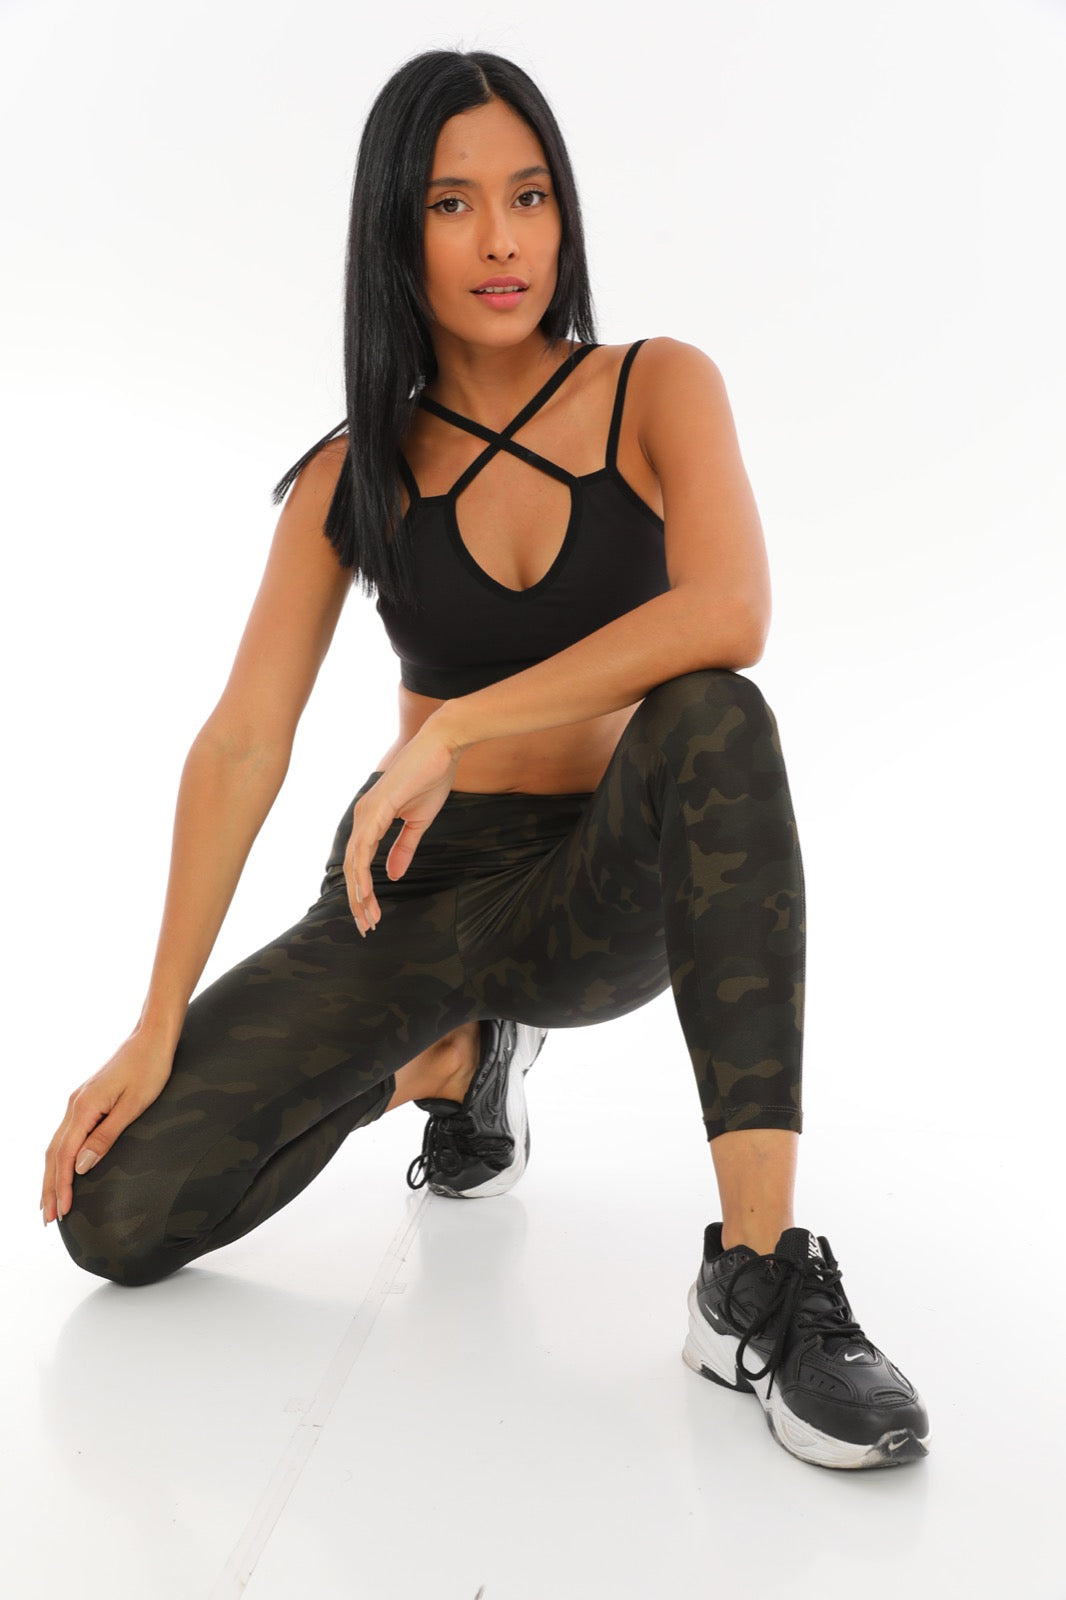 Leggings with Pockets Dark Green Camouflage